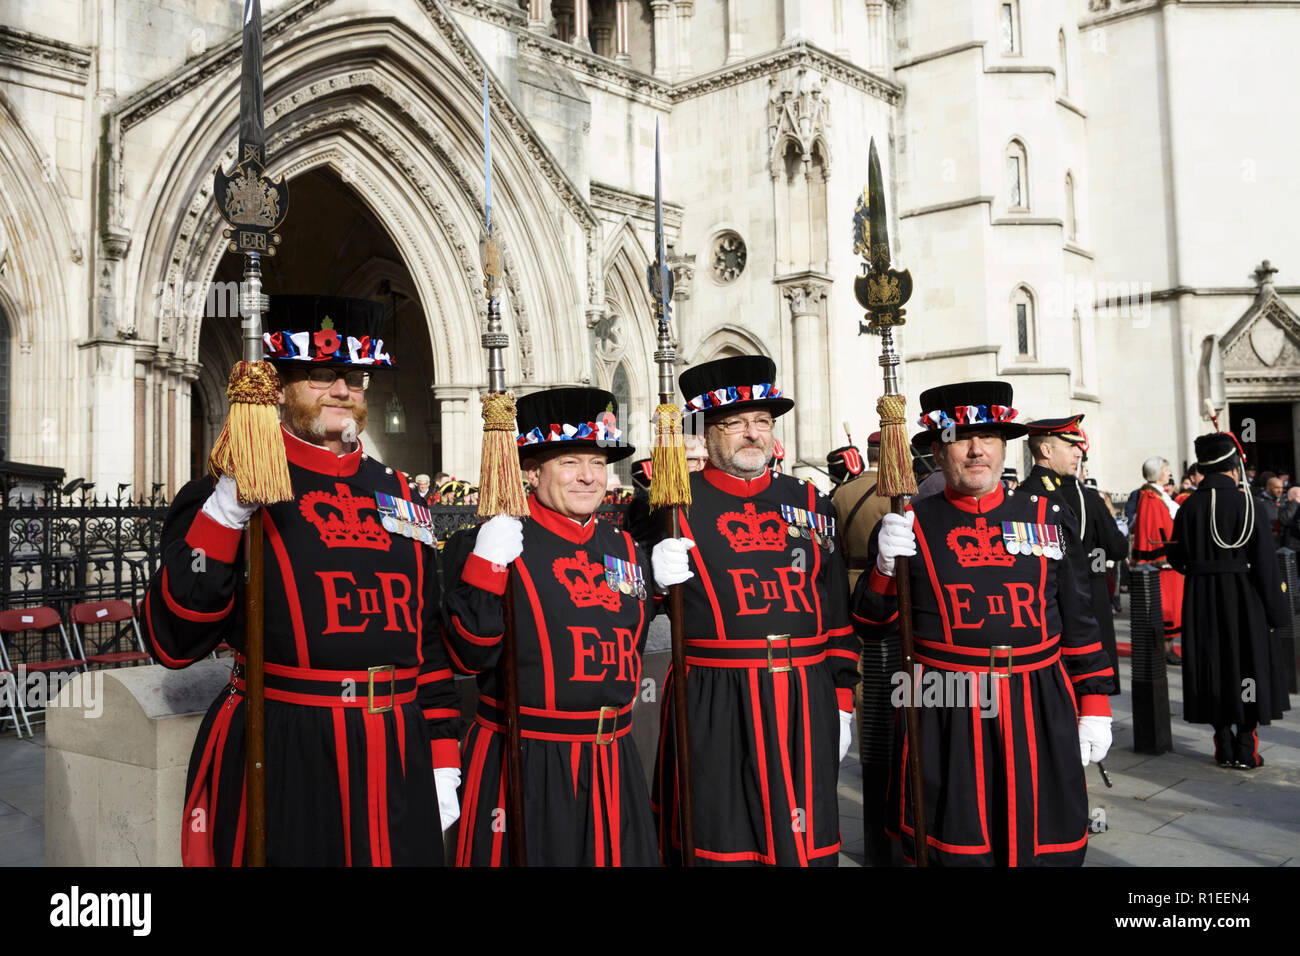 Yeoman Warders (also known as Beefeaters) in ceremonial uniform, outside The Royal Courts of Justice, London, England, UK. Stock Photo